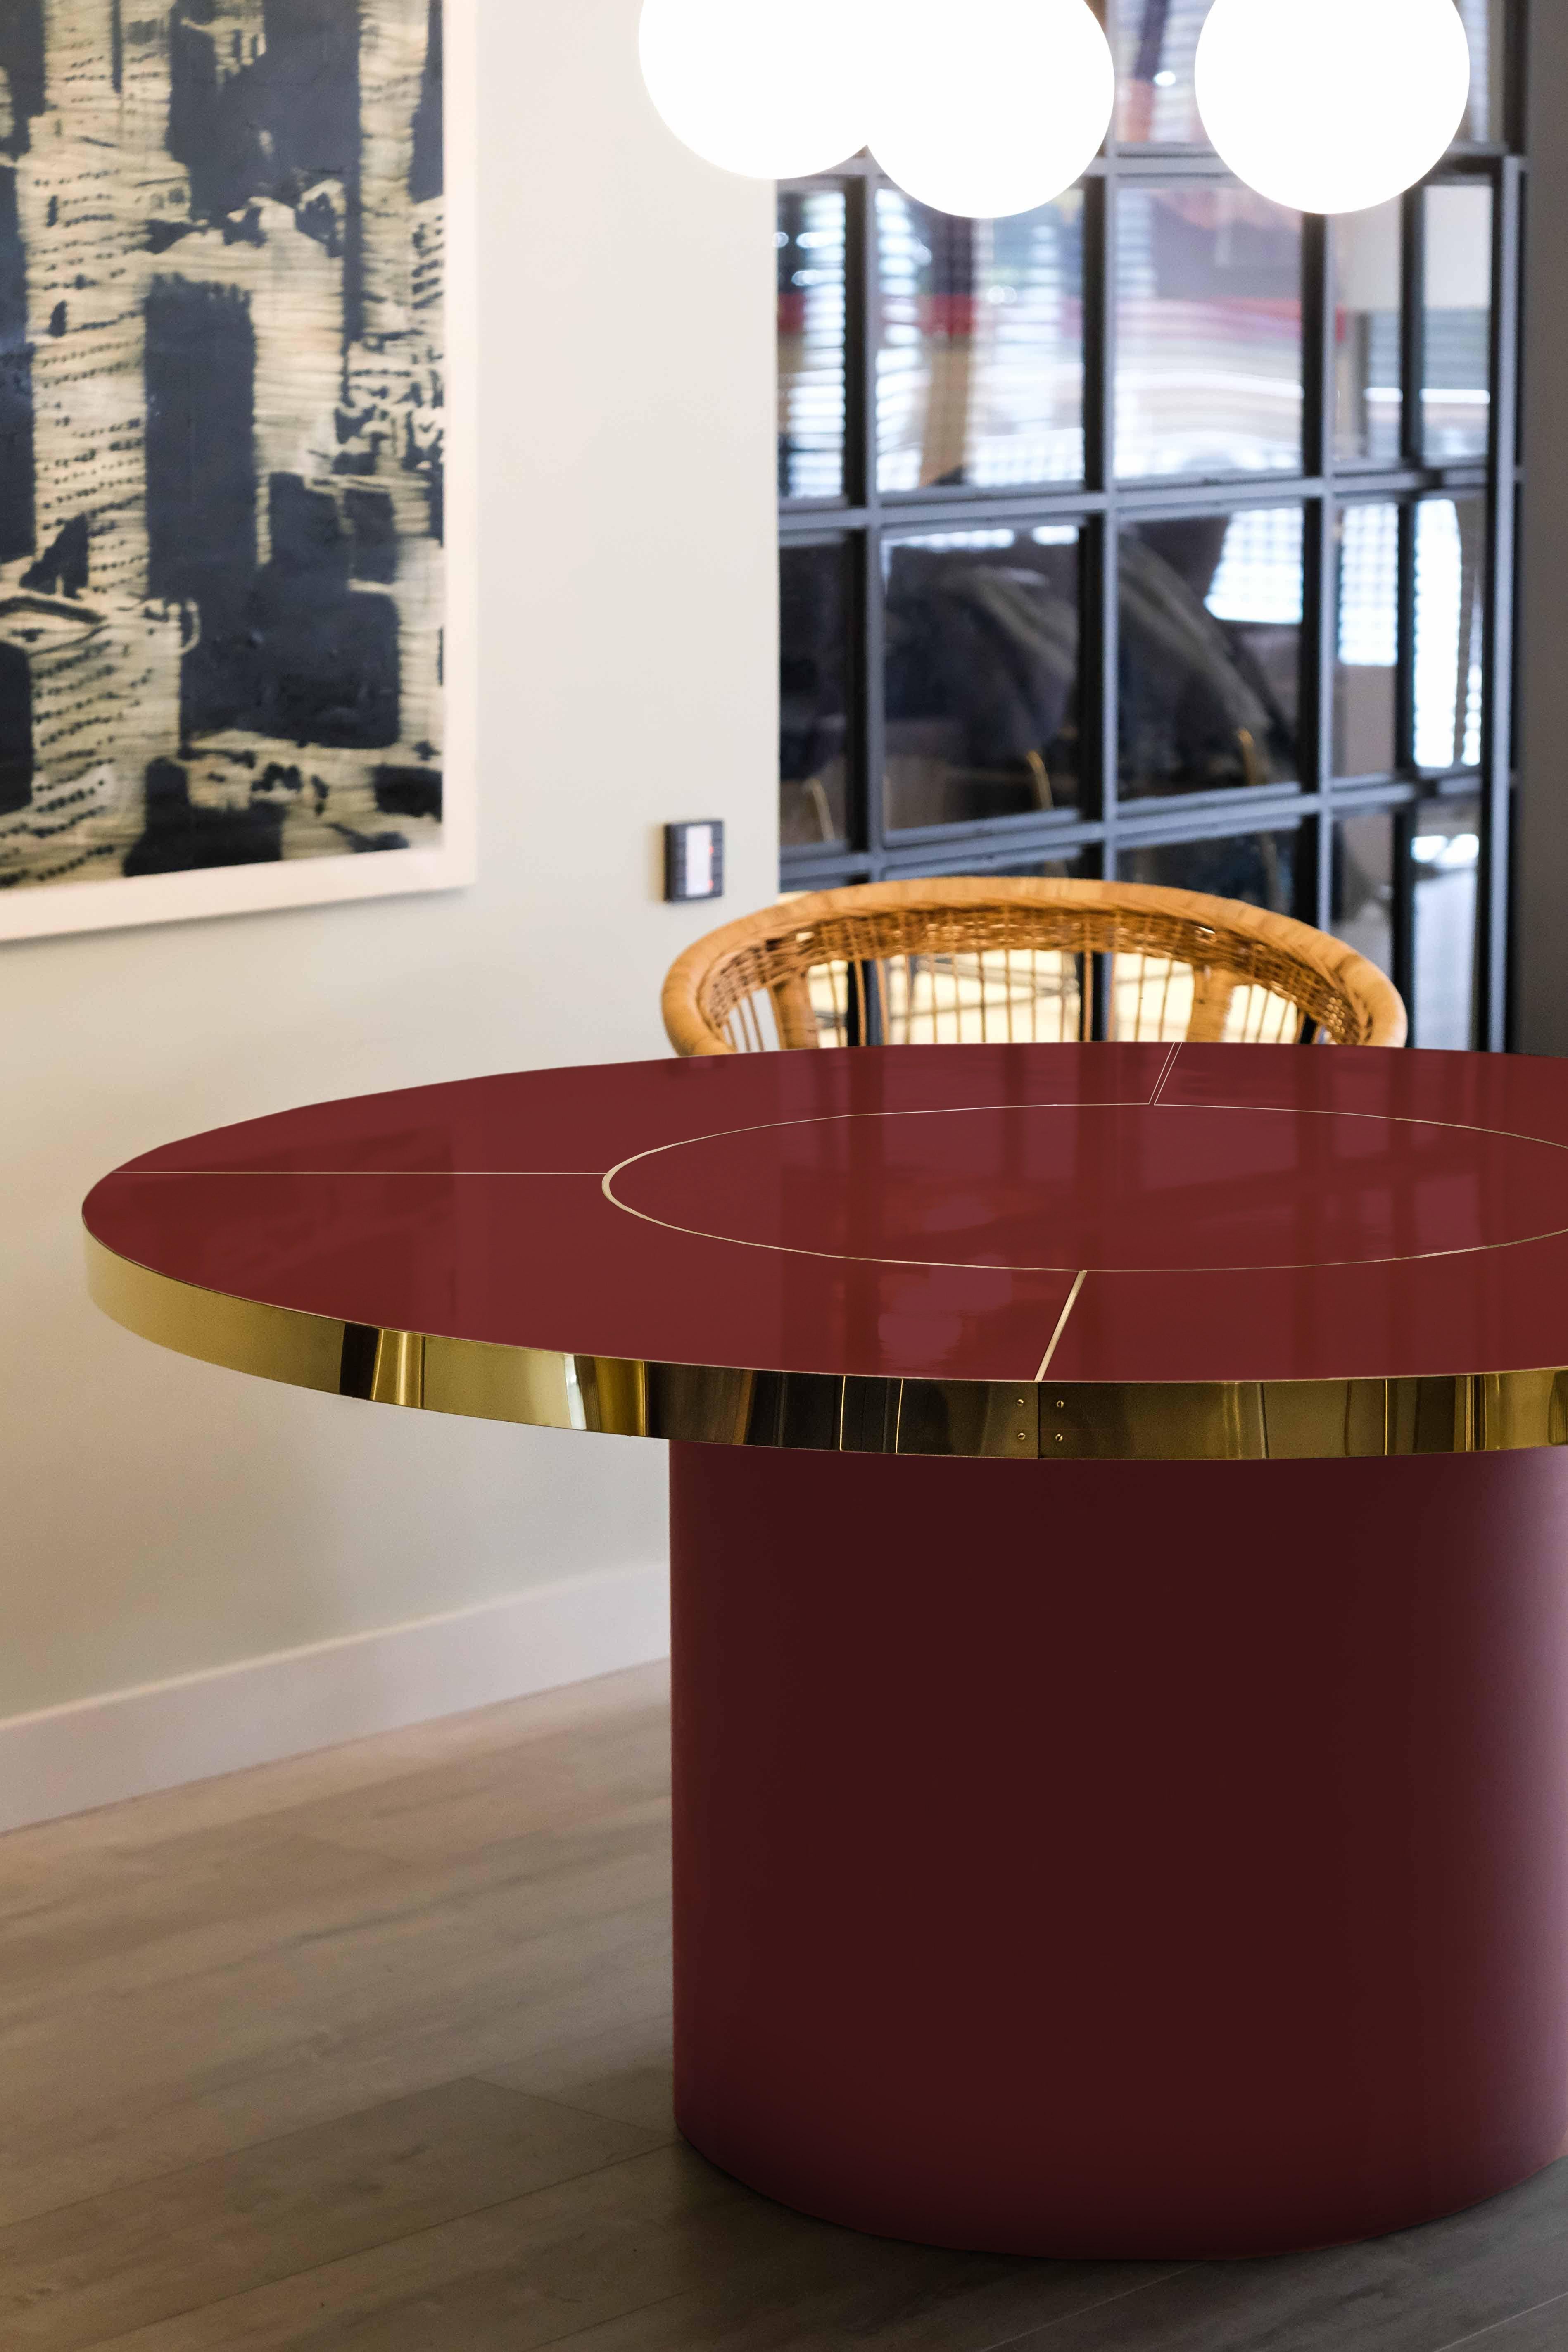 Laiton Retro Design Round Dining Table Palm Springs Style High Gloss Laminated&Brass L en vente